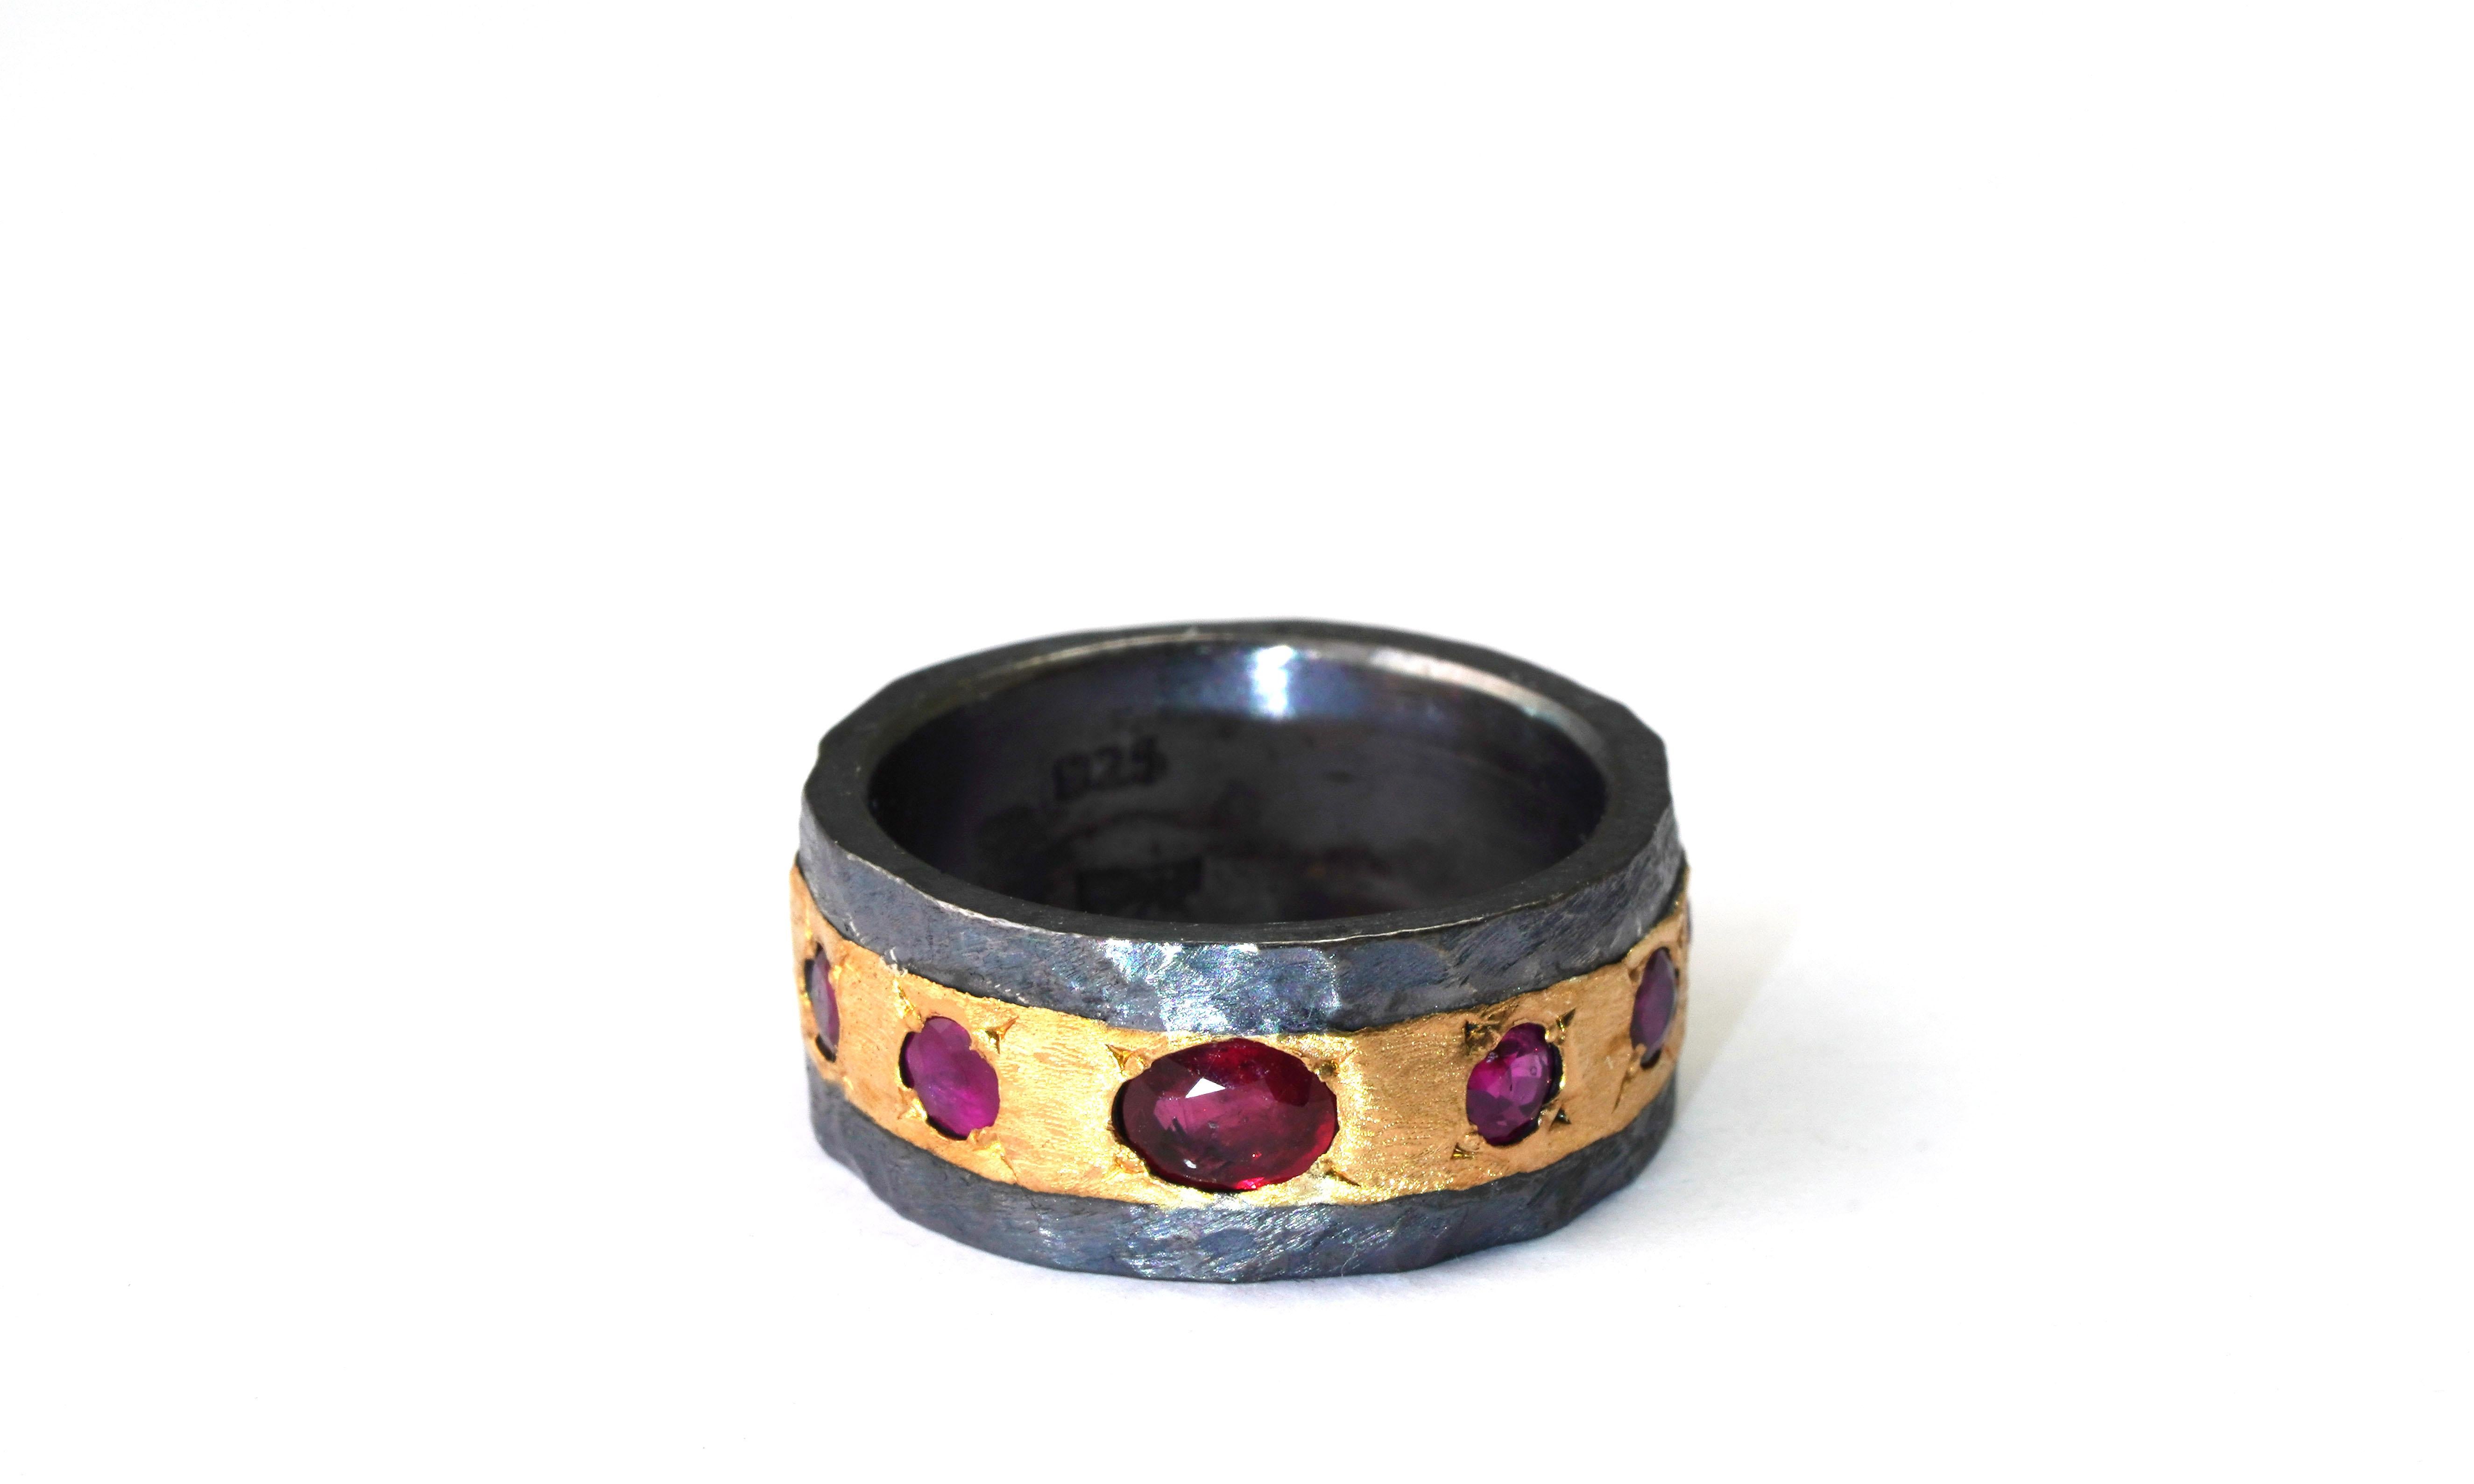 925 Oxidized Silver Ring
Gold kt: Solid 22 kt
Gold color: Yellow
Ring size: 6 3/4 US
Total weight: 9.44 grams

Set with:
- Ruby
Cut: Mixed
Total weight: 1.07 carat
Color: Red